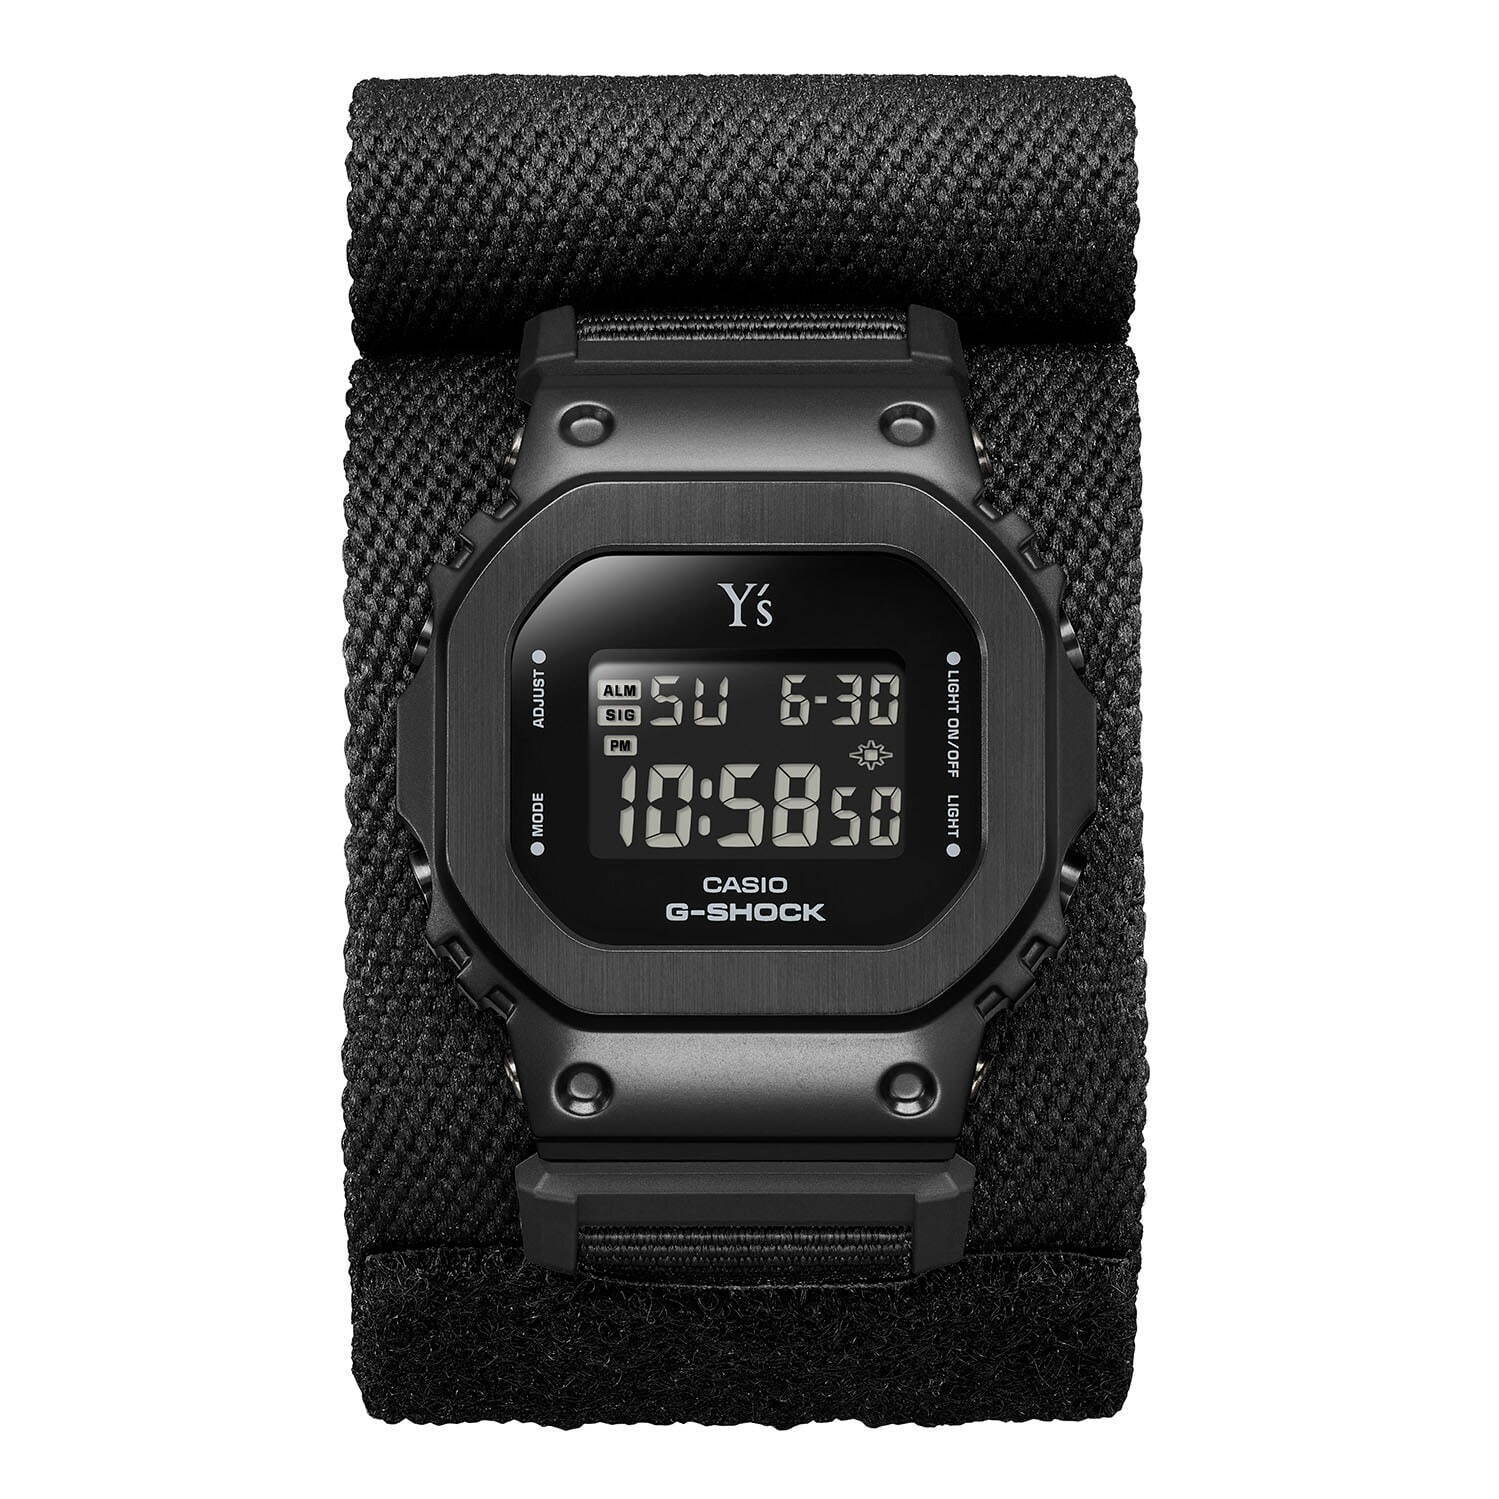 Y's x G-Shock GM-S5600YS-1 includes a covered watch band - G